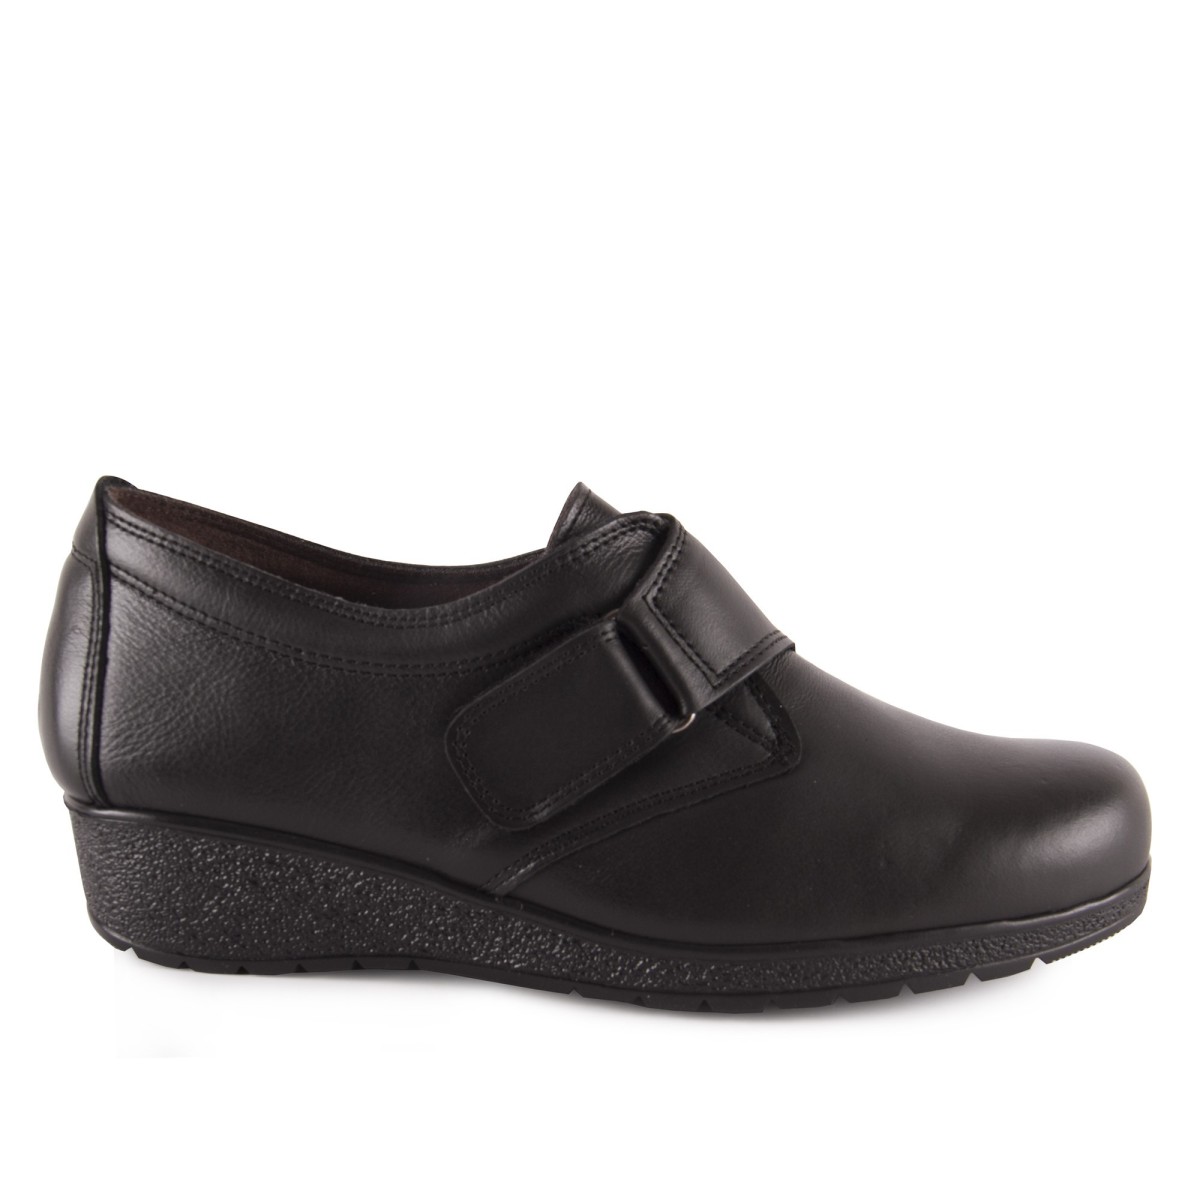 Women's comfort with wedge made in black leather, leather interior closure with strap and velcro and anti-slip rubber sole.
Sho